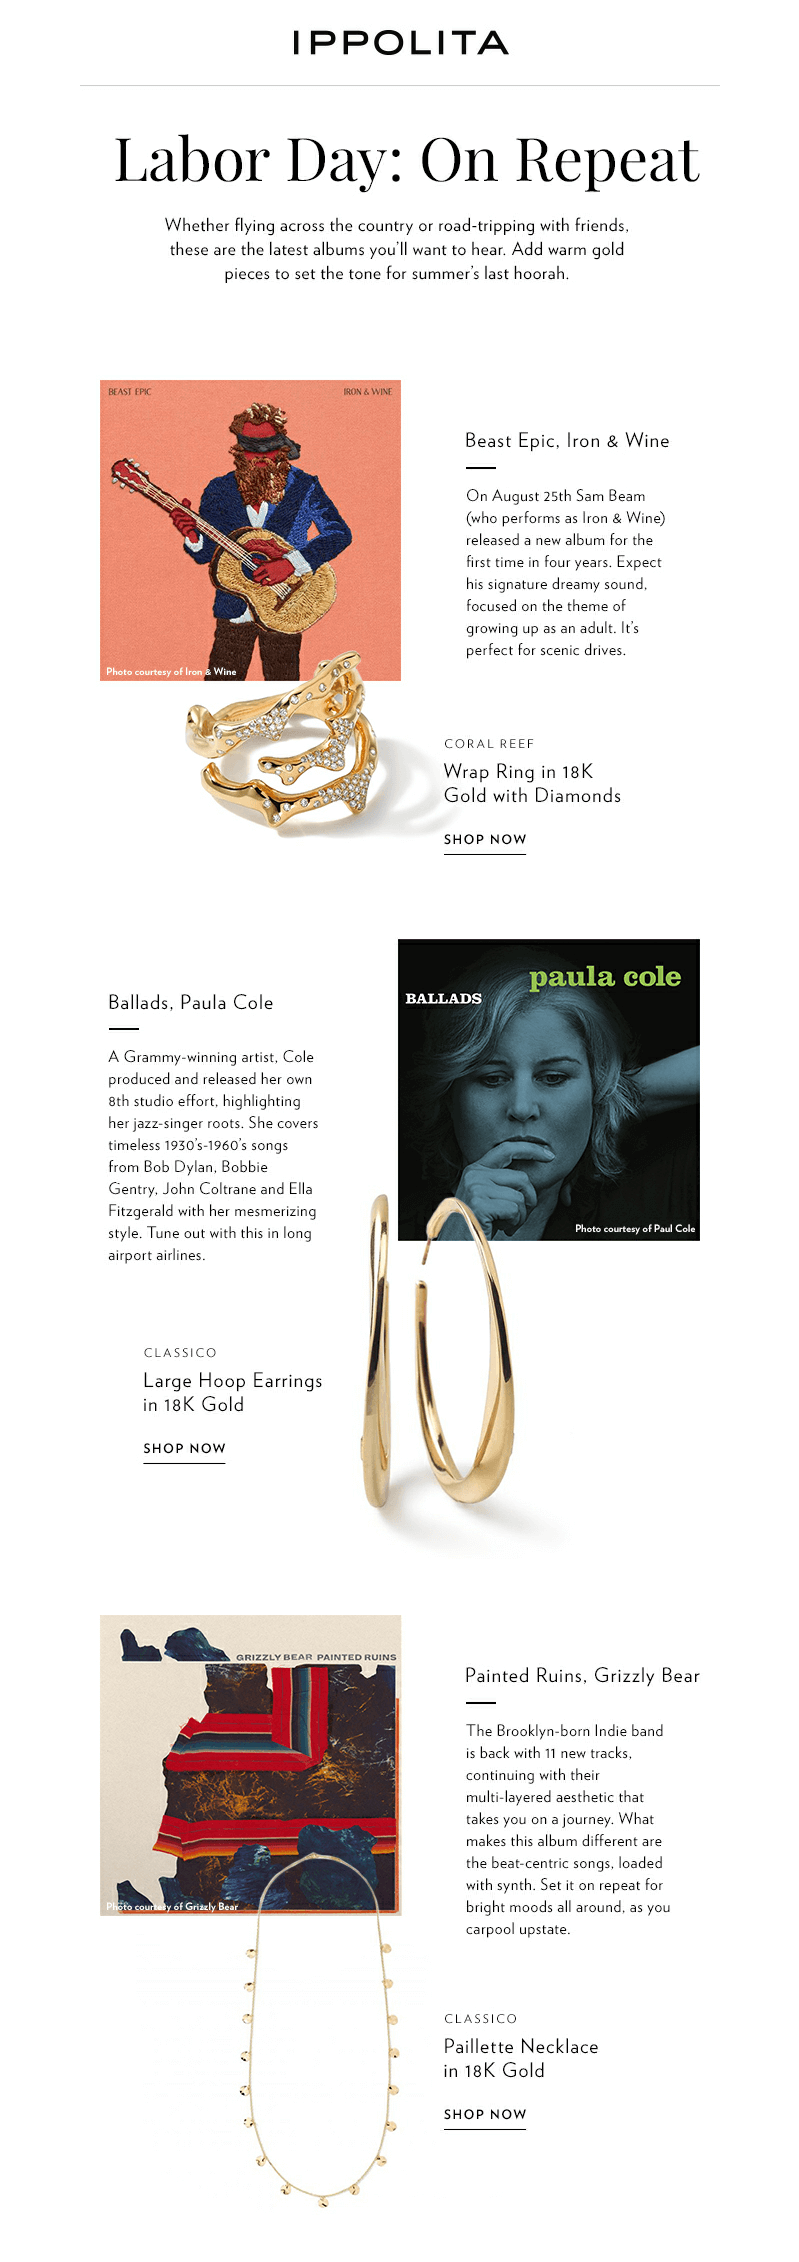 Labor Day email from Ippolita that features a selection of the latest music records to listen to, short reviews, and jewelry pieces with the same vibe